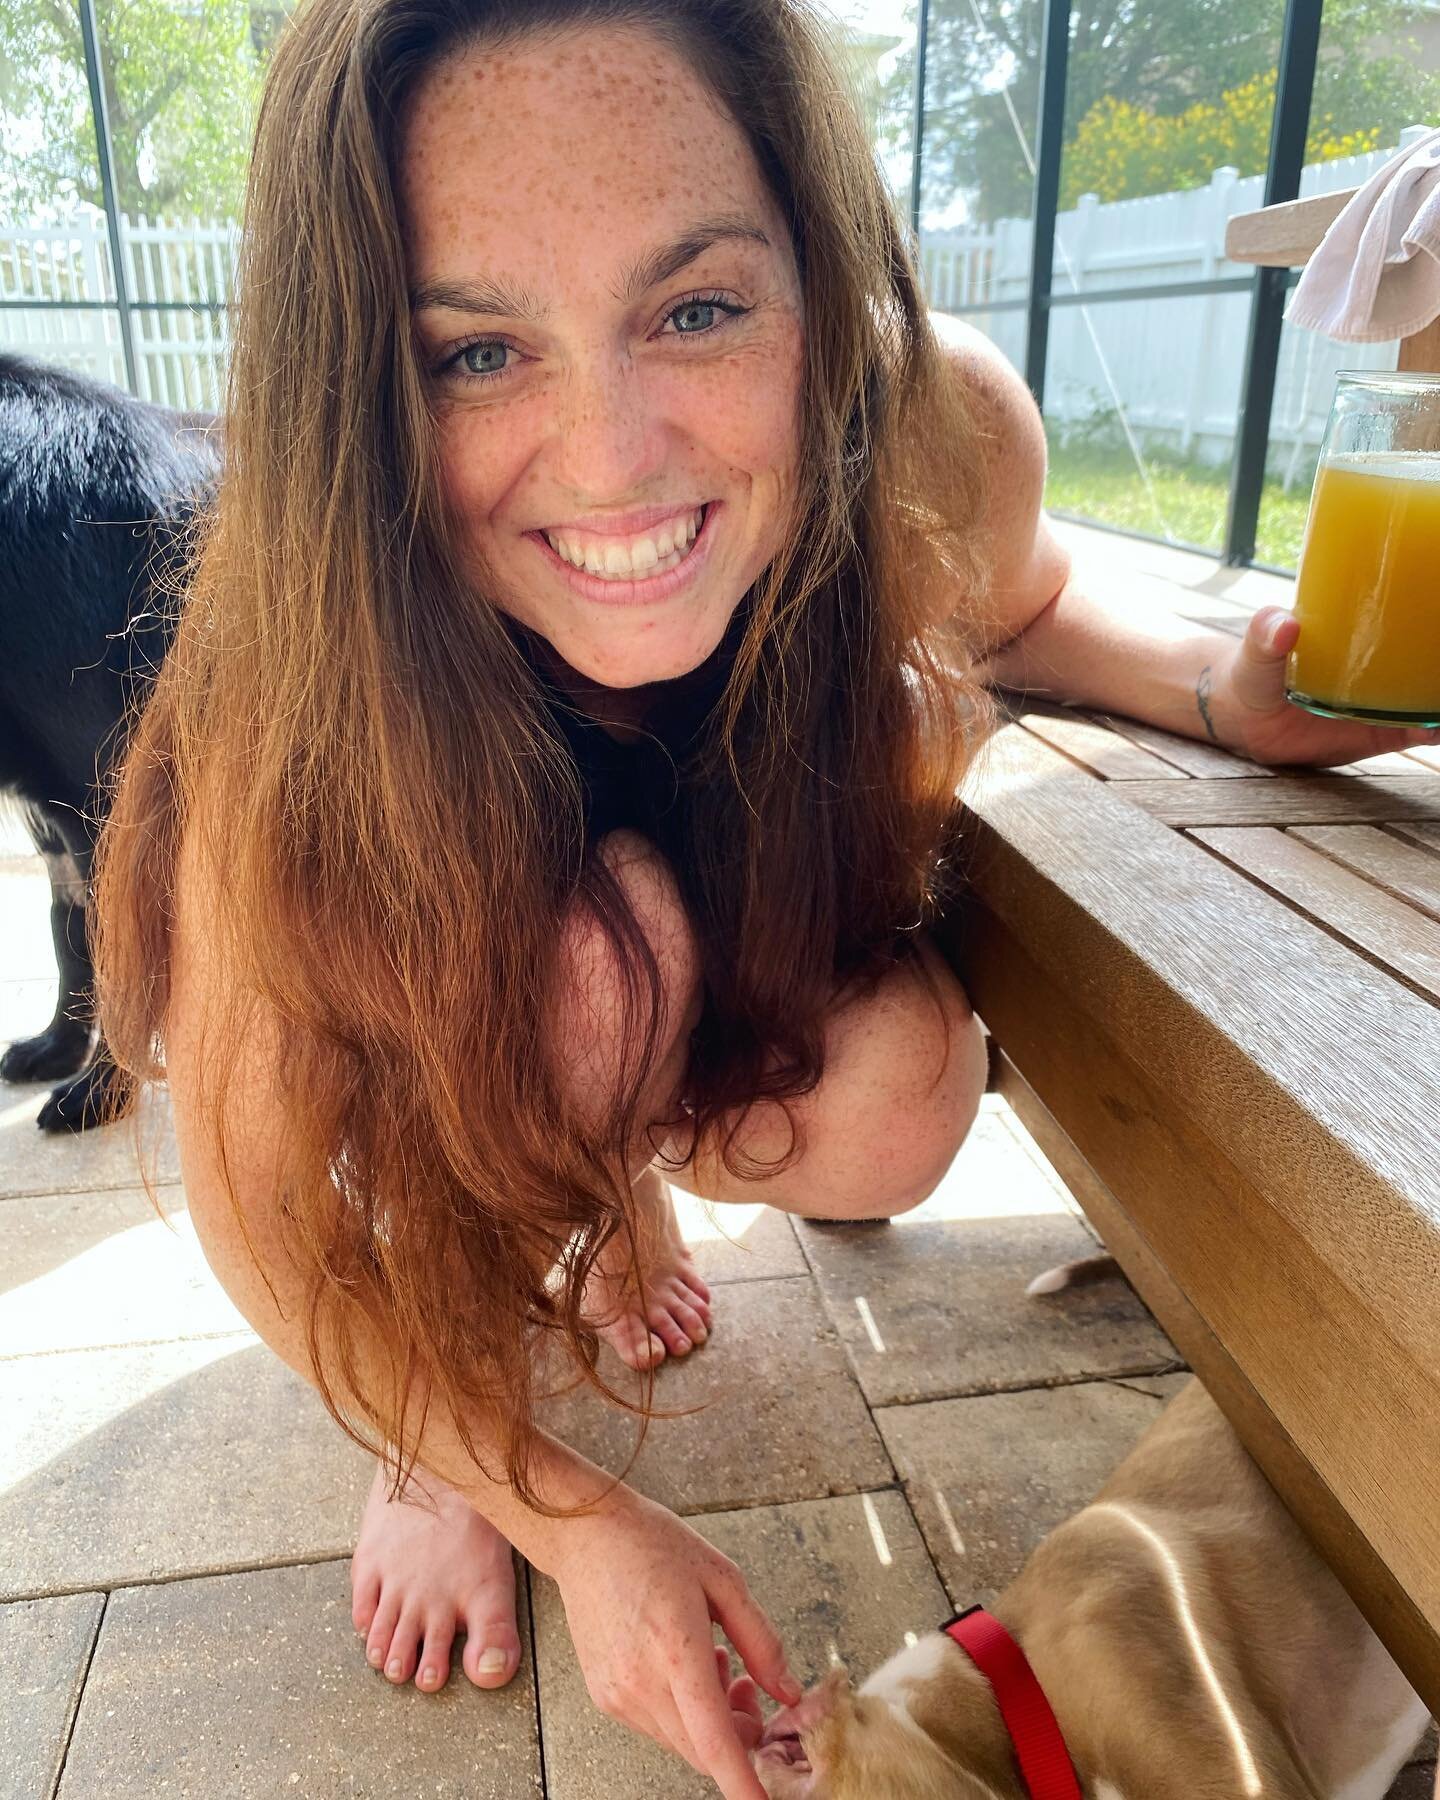 A pup and a beer? Am I in heaven?